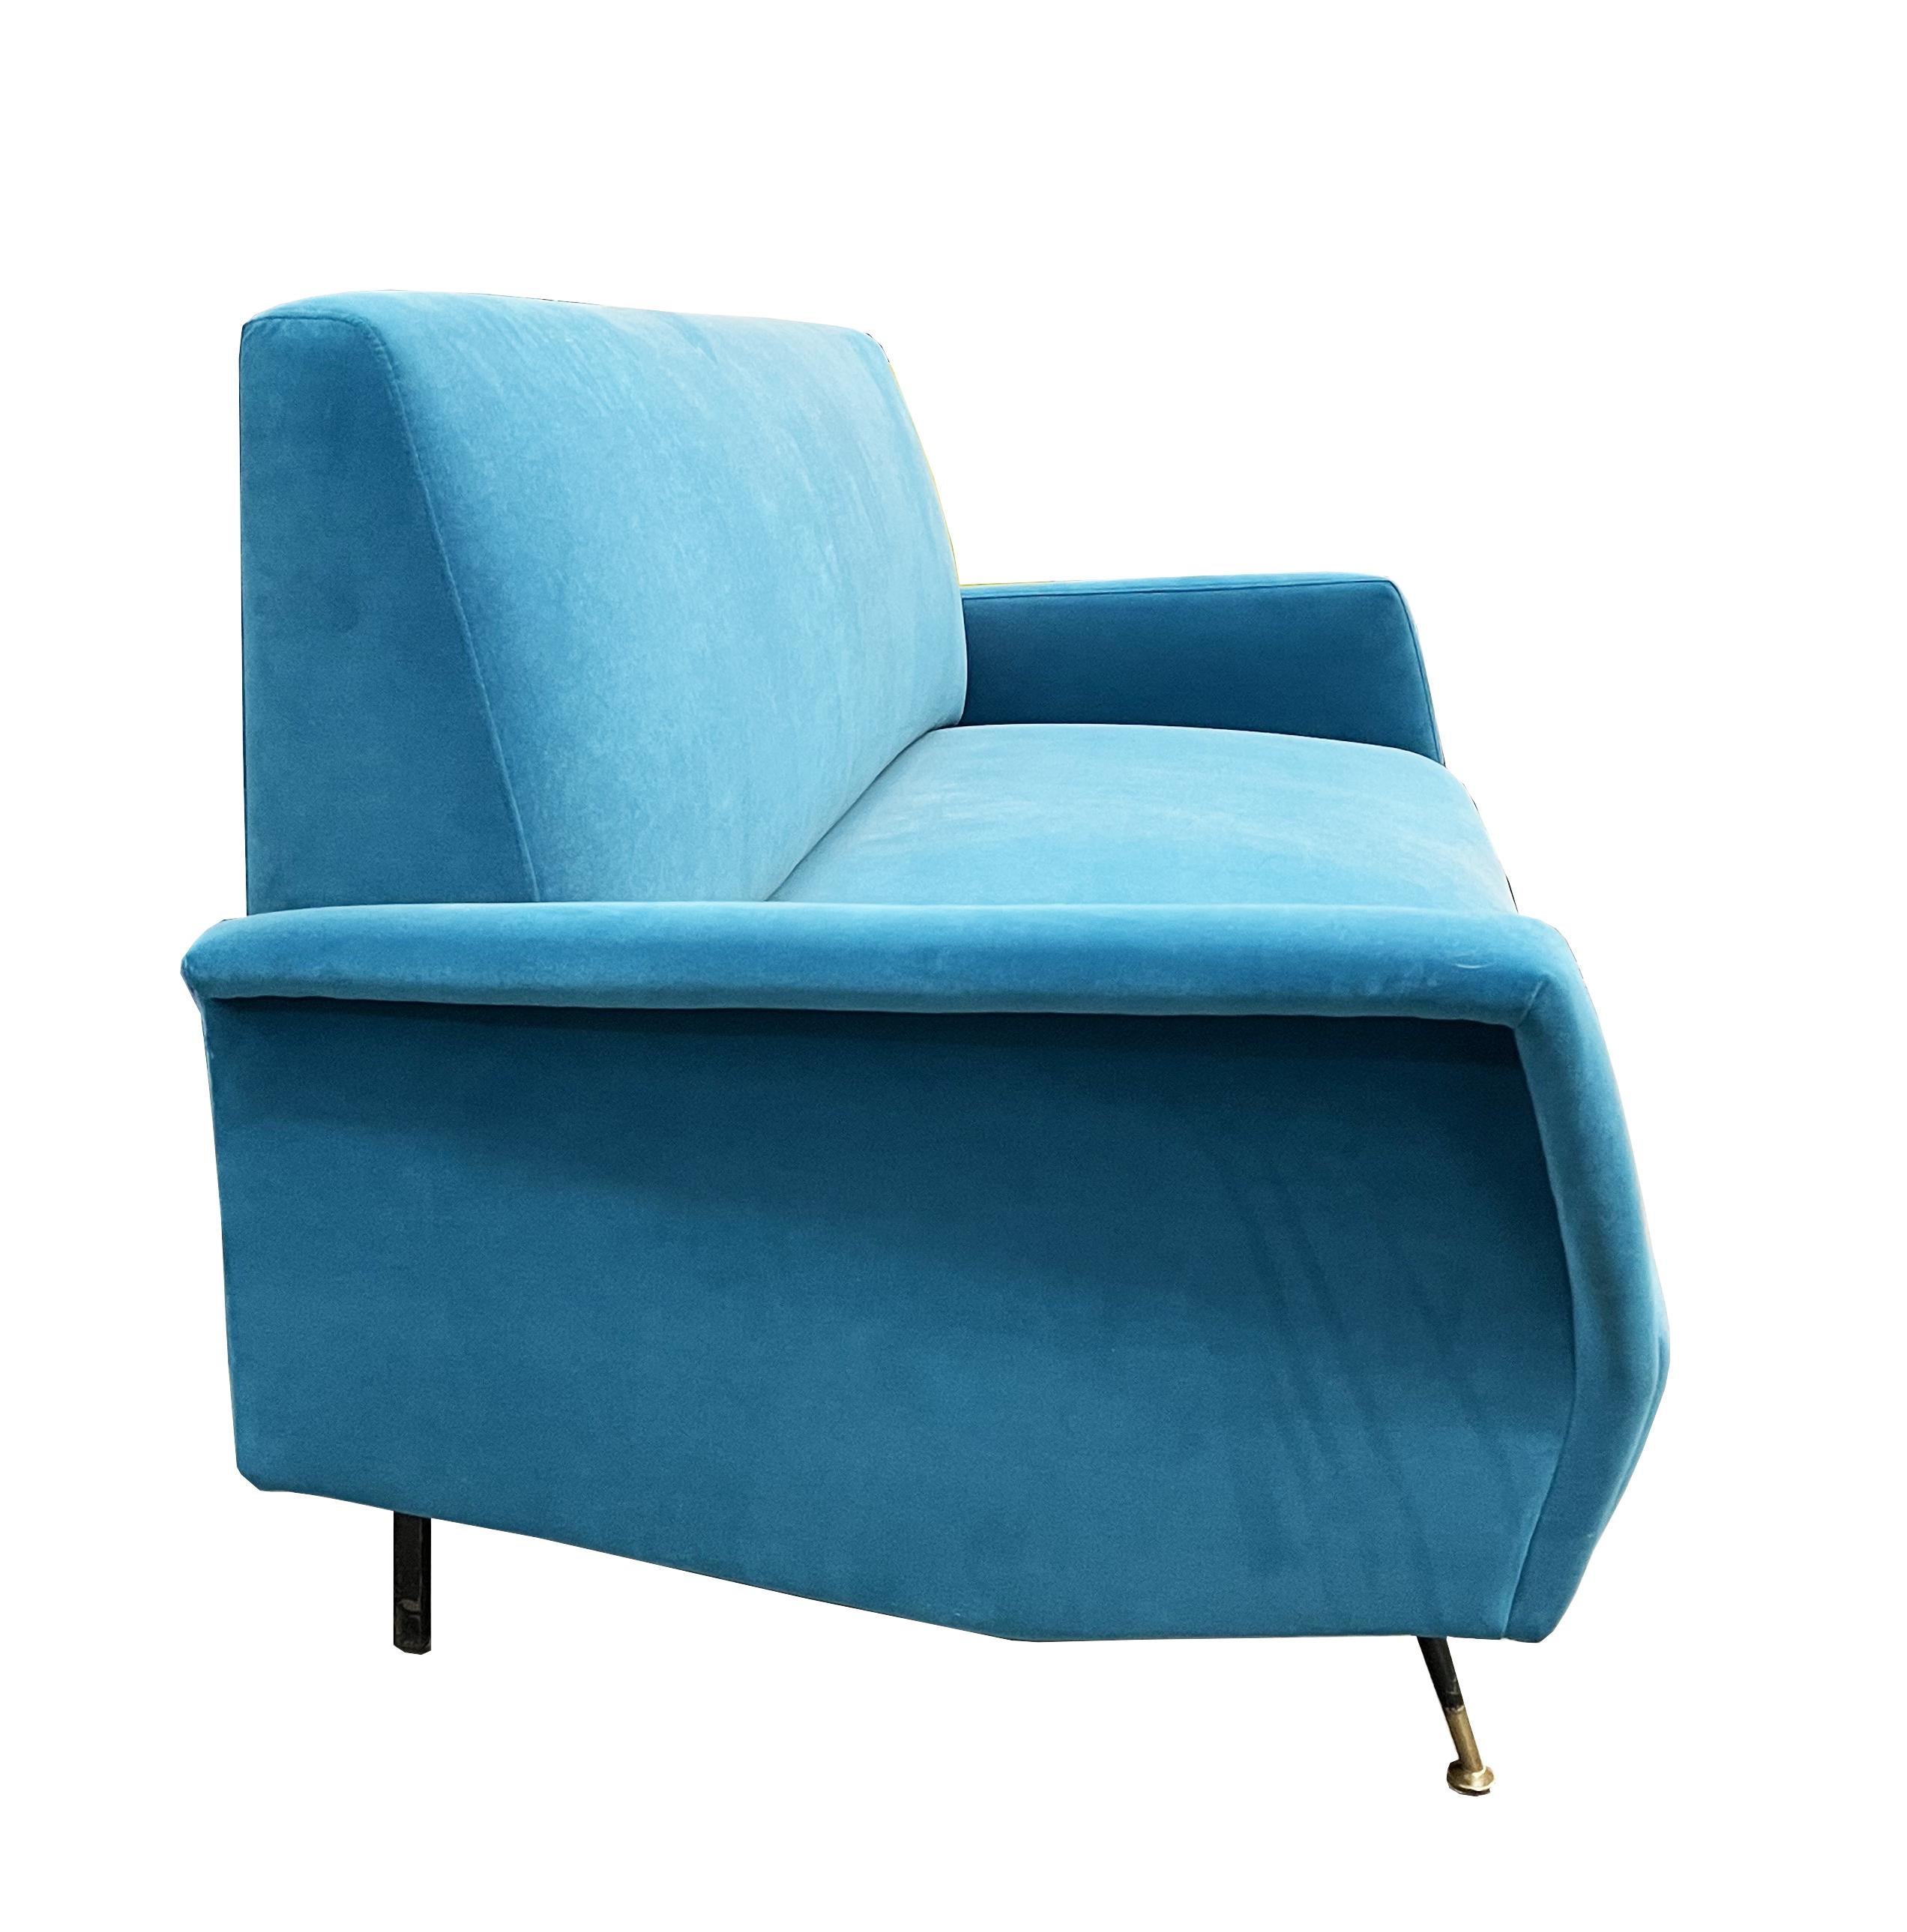 Italian Mid-Century Modern Aqua Velvet Sofa in the Style of Gio Ponti In Good Condition For Sale In New York, NY